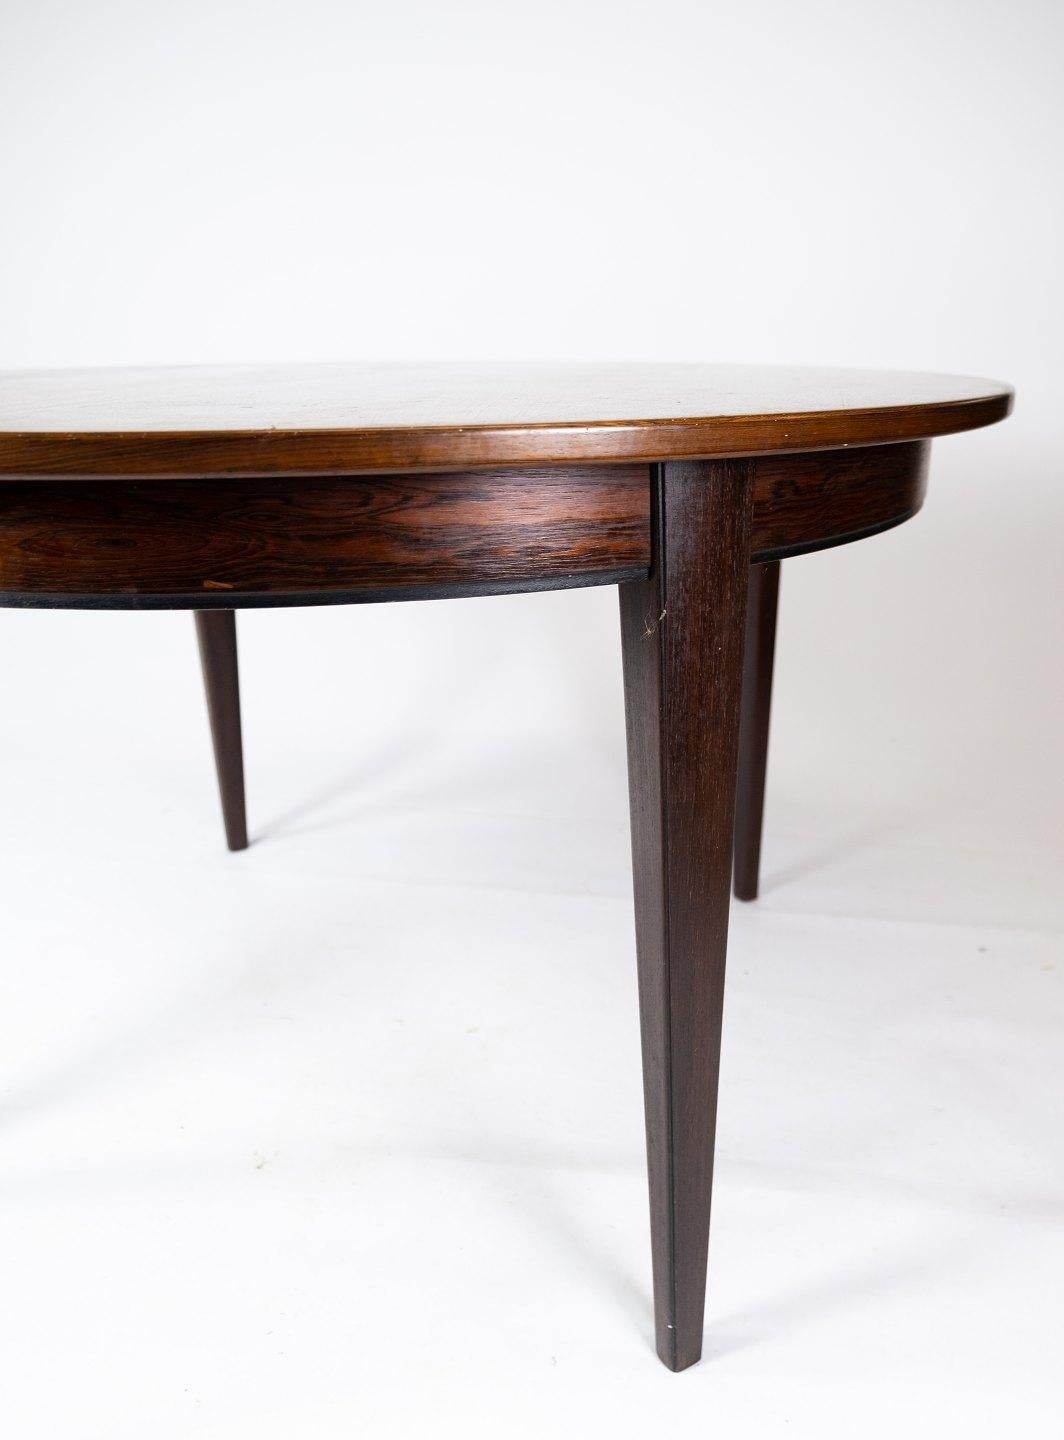 This rosewood dining table is an example of the fine craftsmanship of Oman Junior, a renowned Danish furniture manufacturer active in the 1960s. The warm tones and beautiful veins of the rosewood give the table a timeless elegance and a distinctive